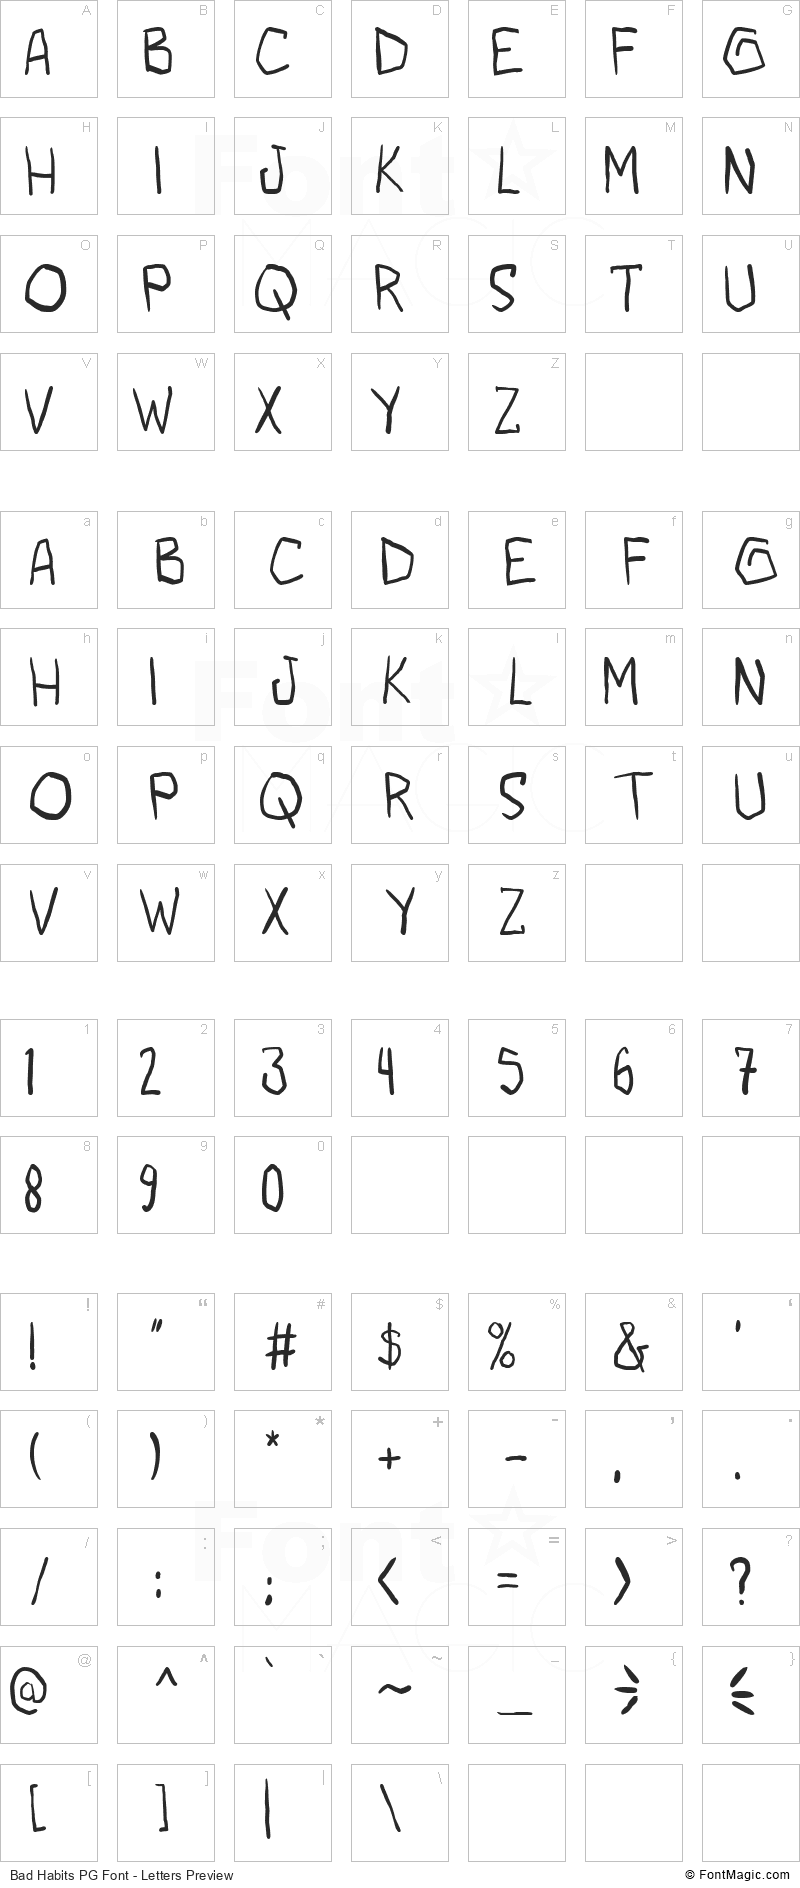 Bad Habits PG Font - All Latters Preview Chart